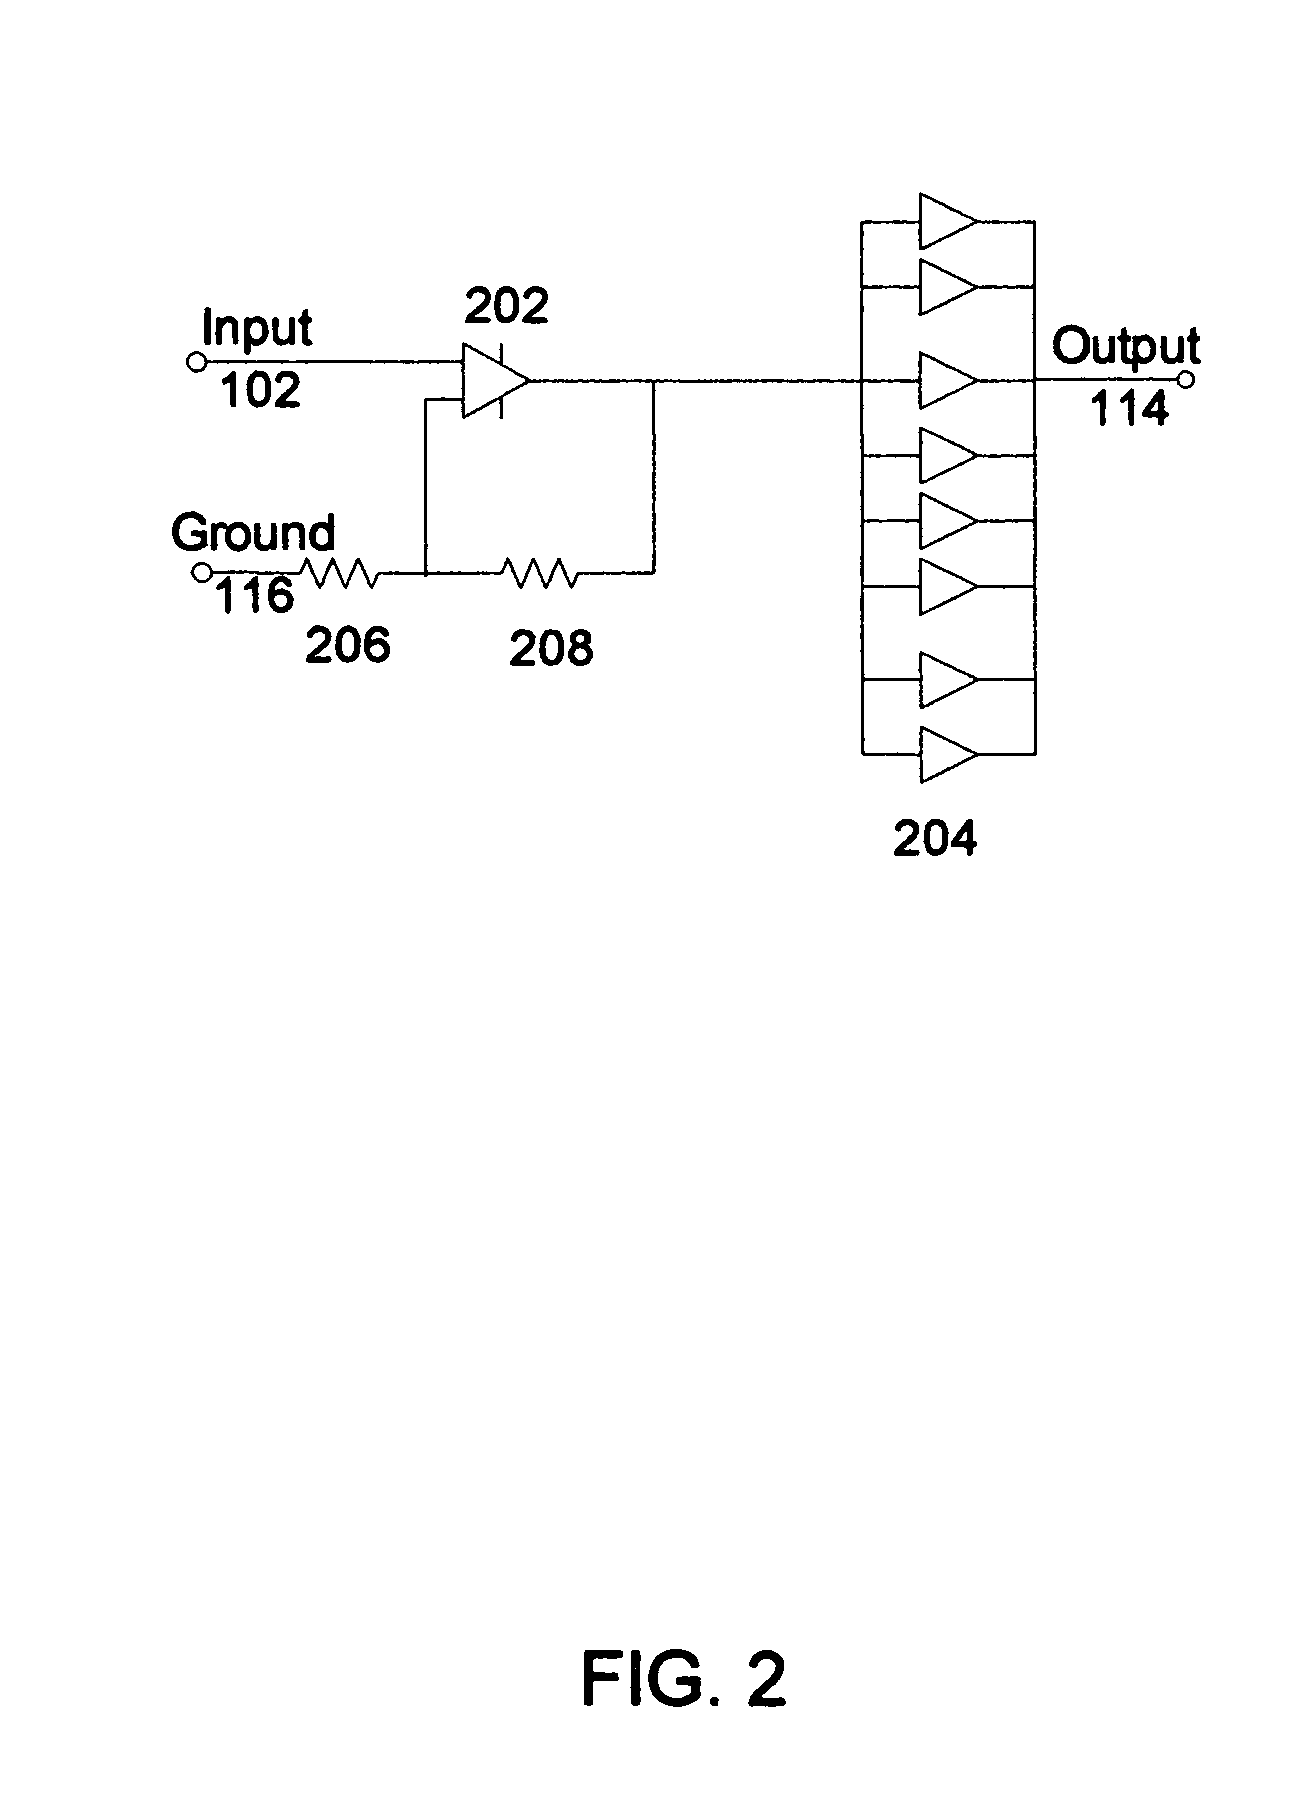 High voltage, high current, and high accuracy amplifier